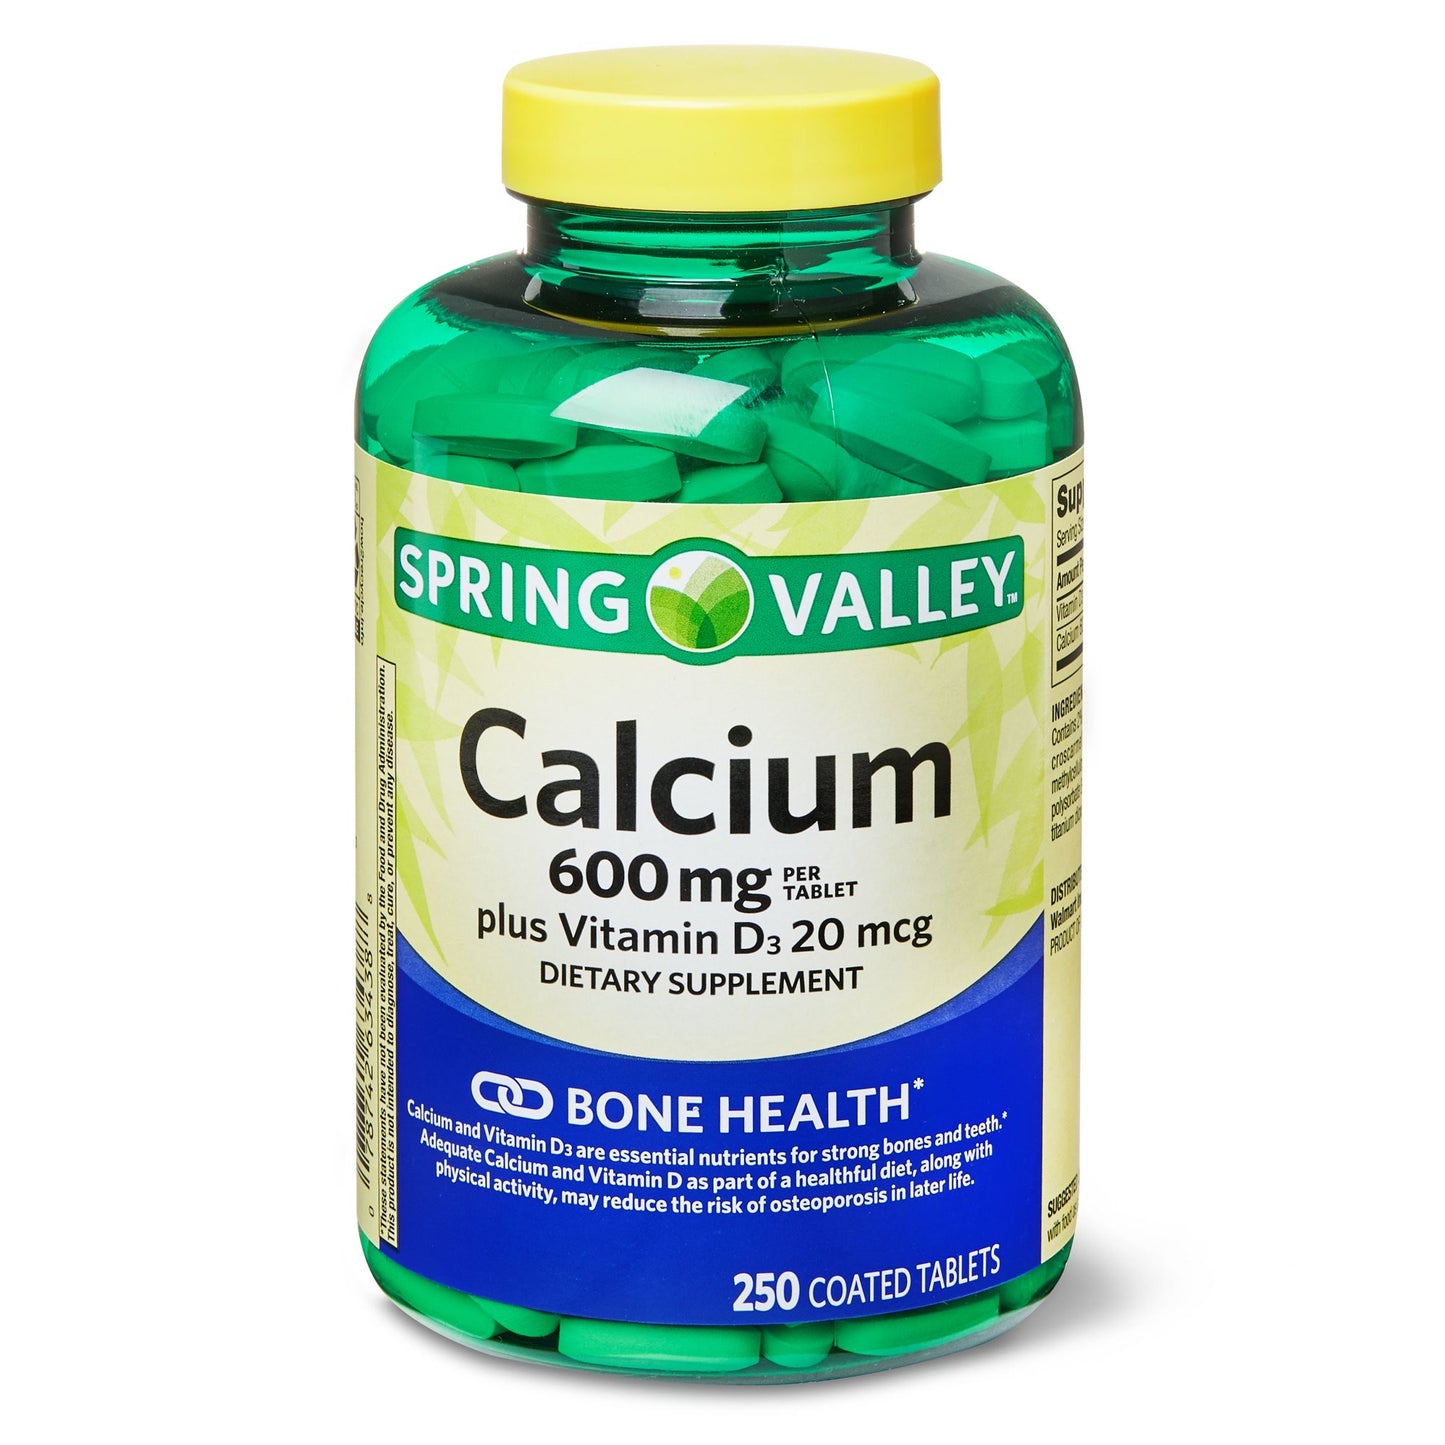 Spring Valley Calcium 600 mg plus Vitamin D3 20 mcg Coated Tablets, 250 Count